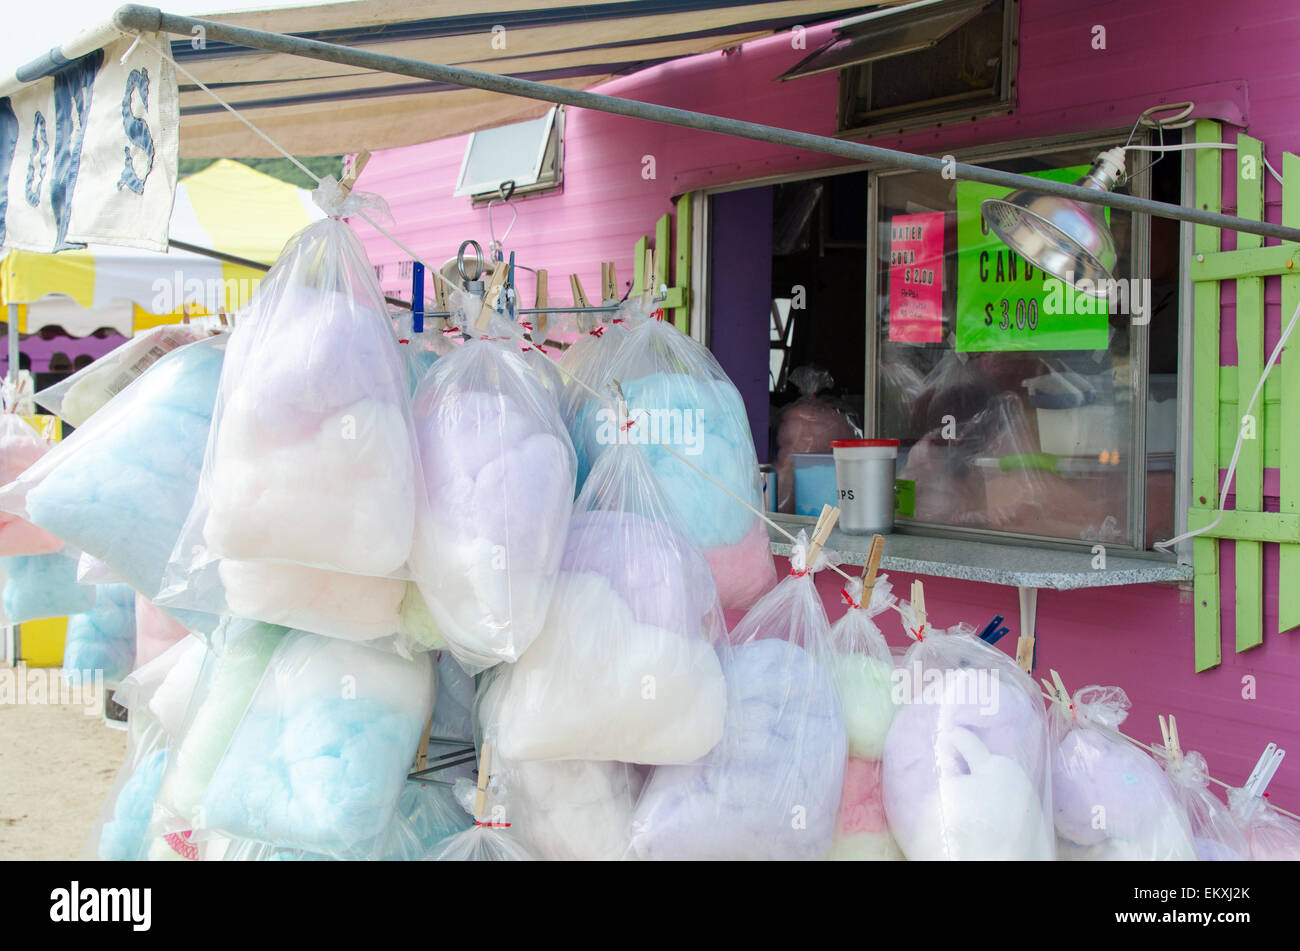 A bright pink food truck sells bags of cotton candy at the Blue Hill Fair, Maine. Stock Photo